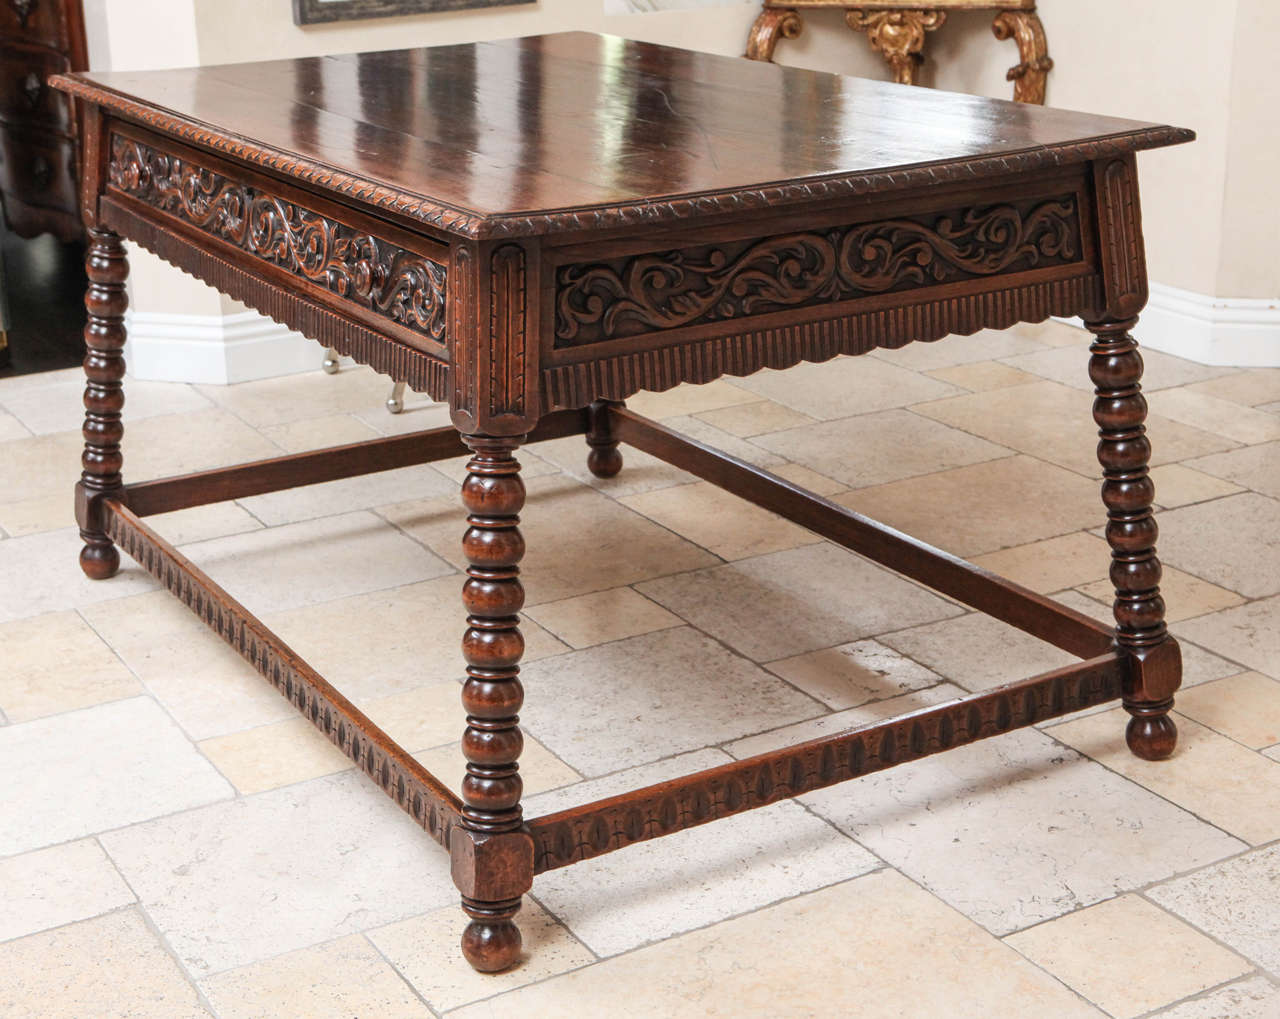 19th century Italian walnut library table with single drawer. The table can be floated in the middle of a room as it is beautifully carved on all sides.